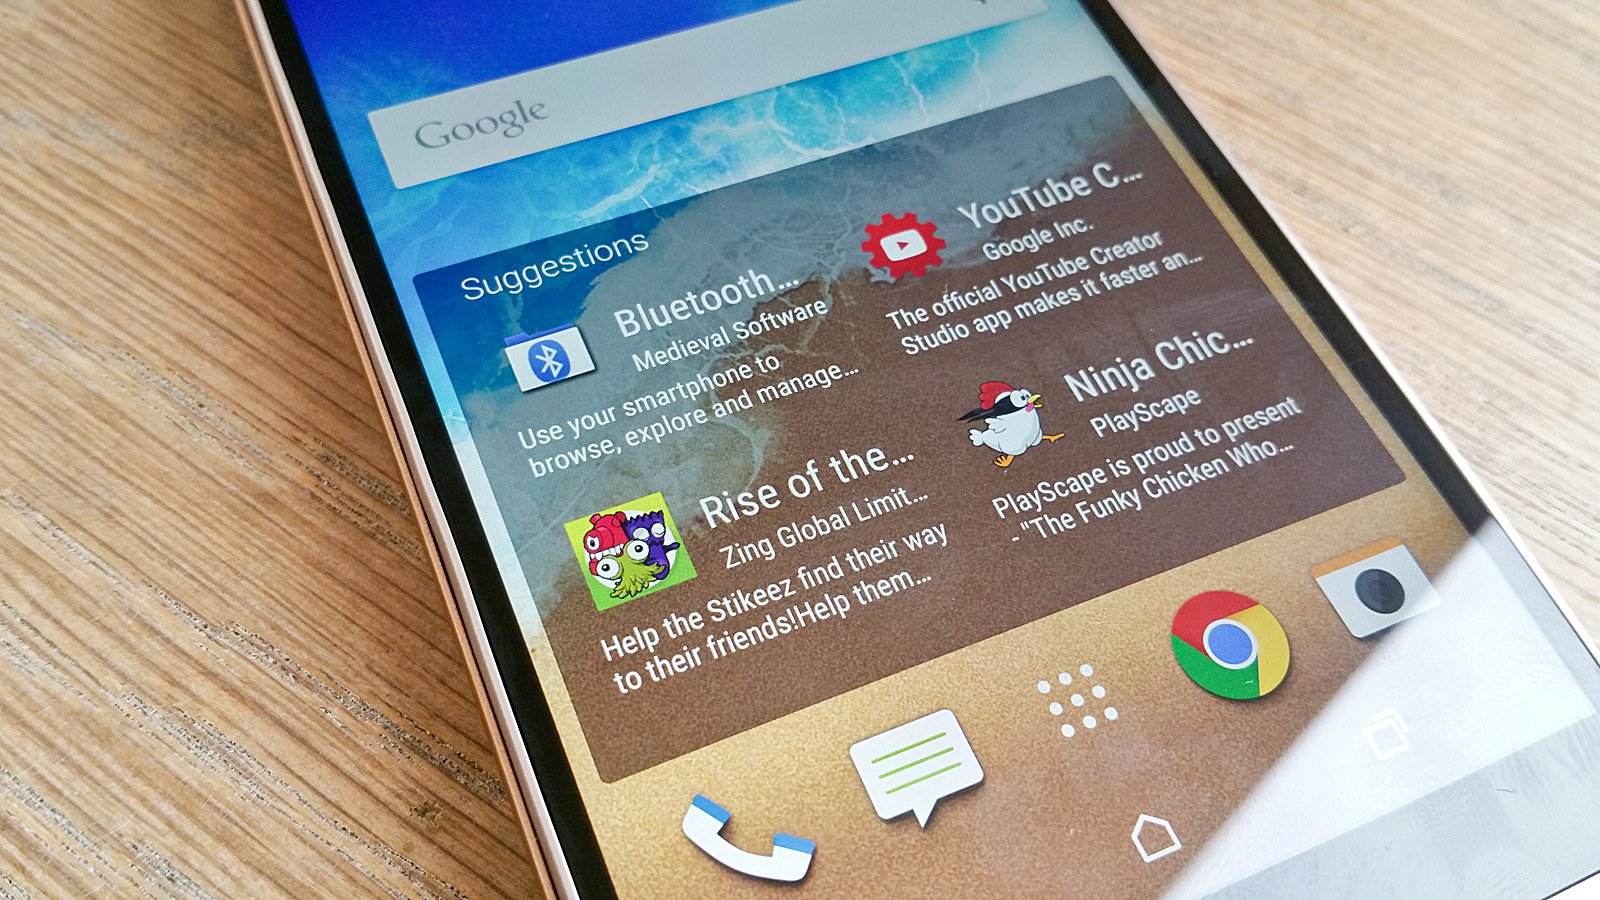 HTC One M9 Home Launcher